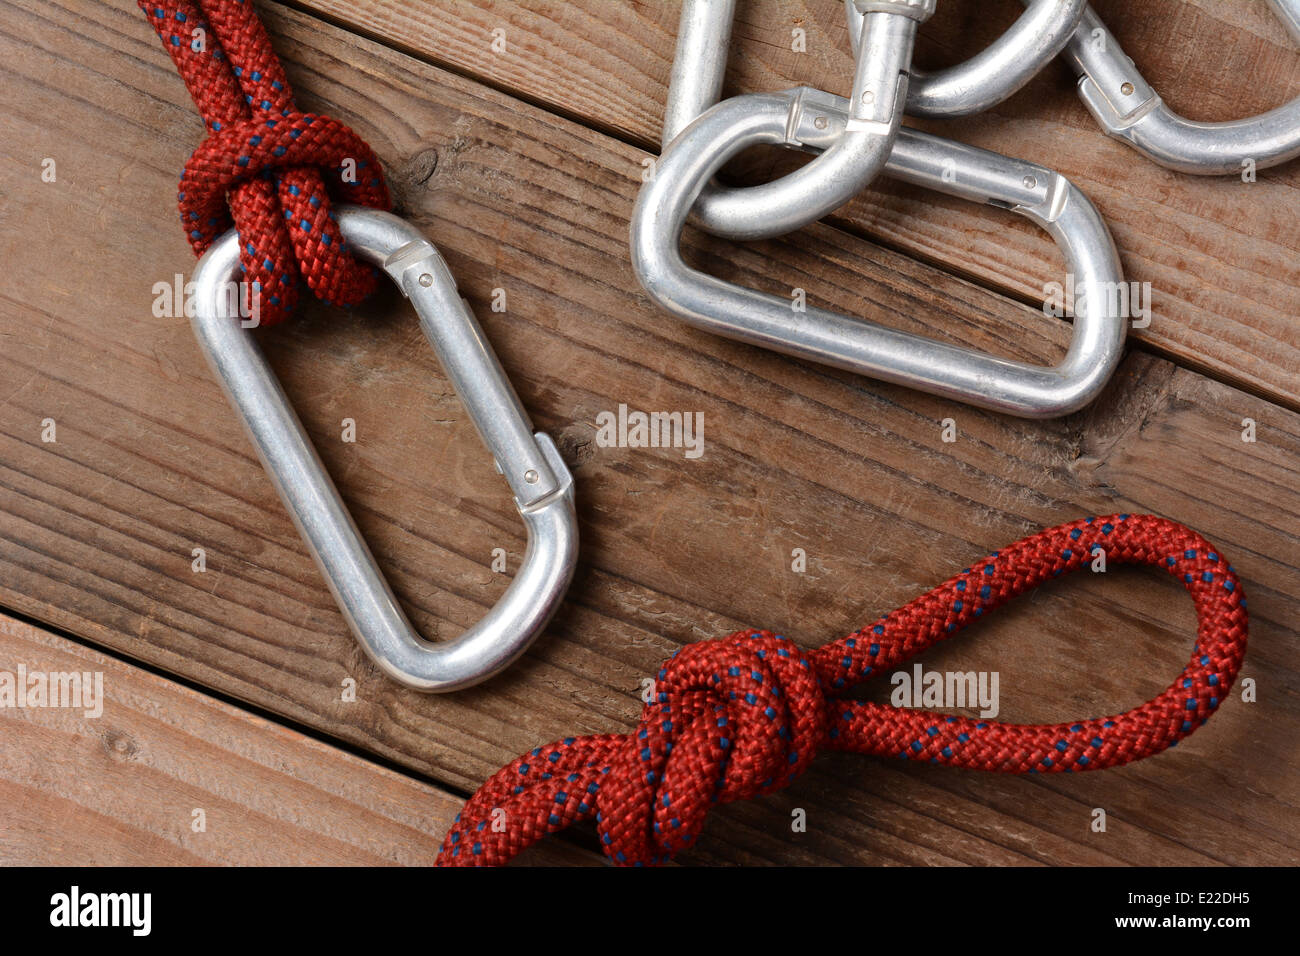 Closeup of a climbing rope and carabiners on a rustic wooden cabin floor. Horizontal format. Stock Photo